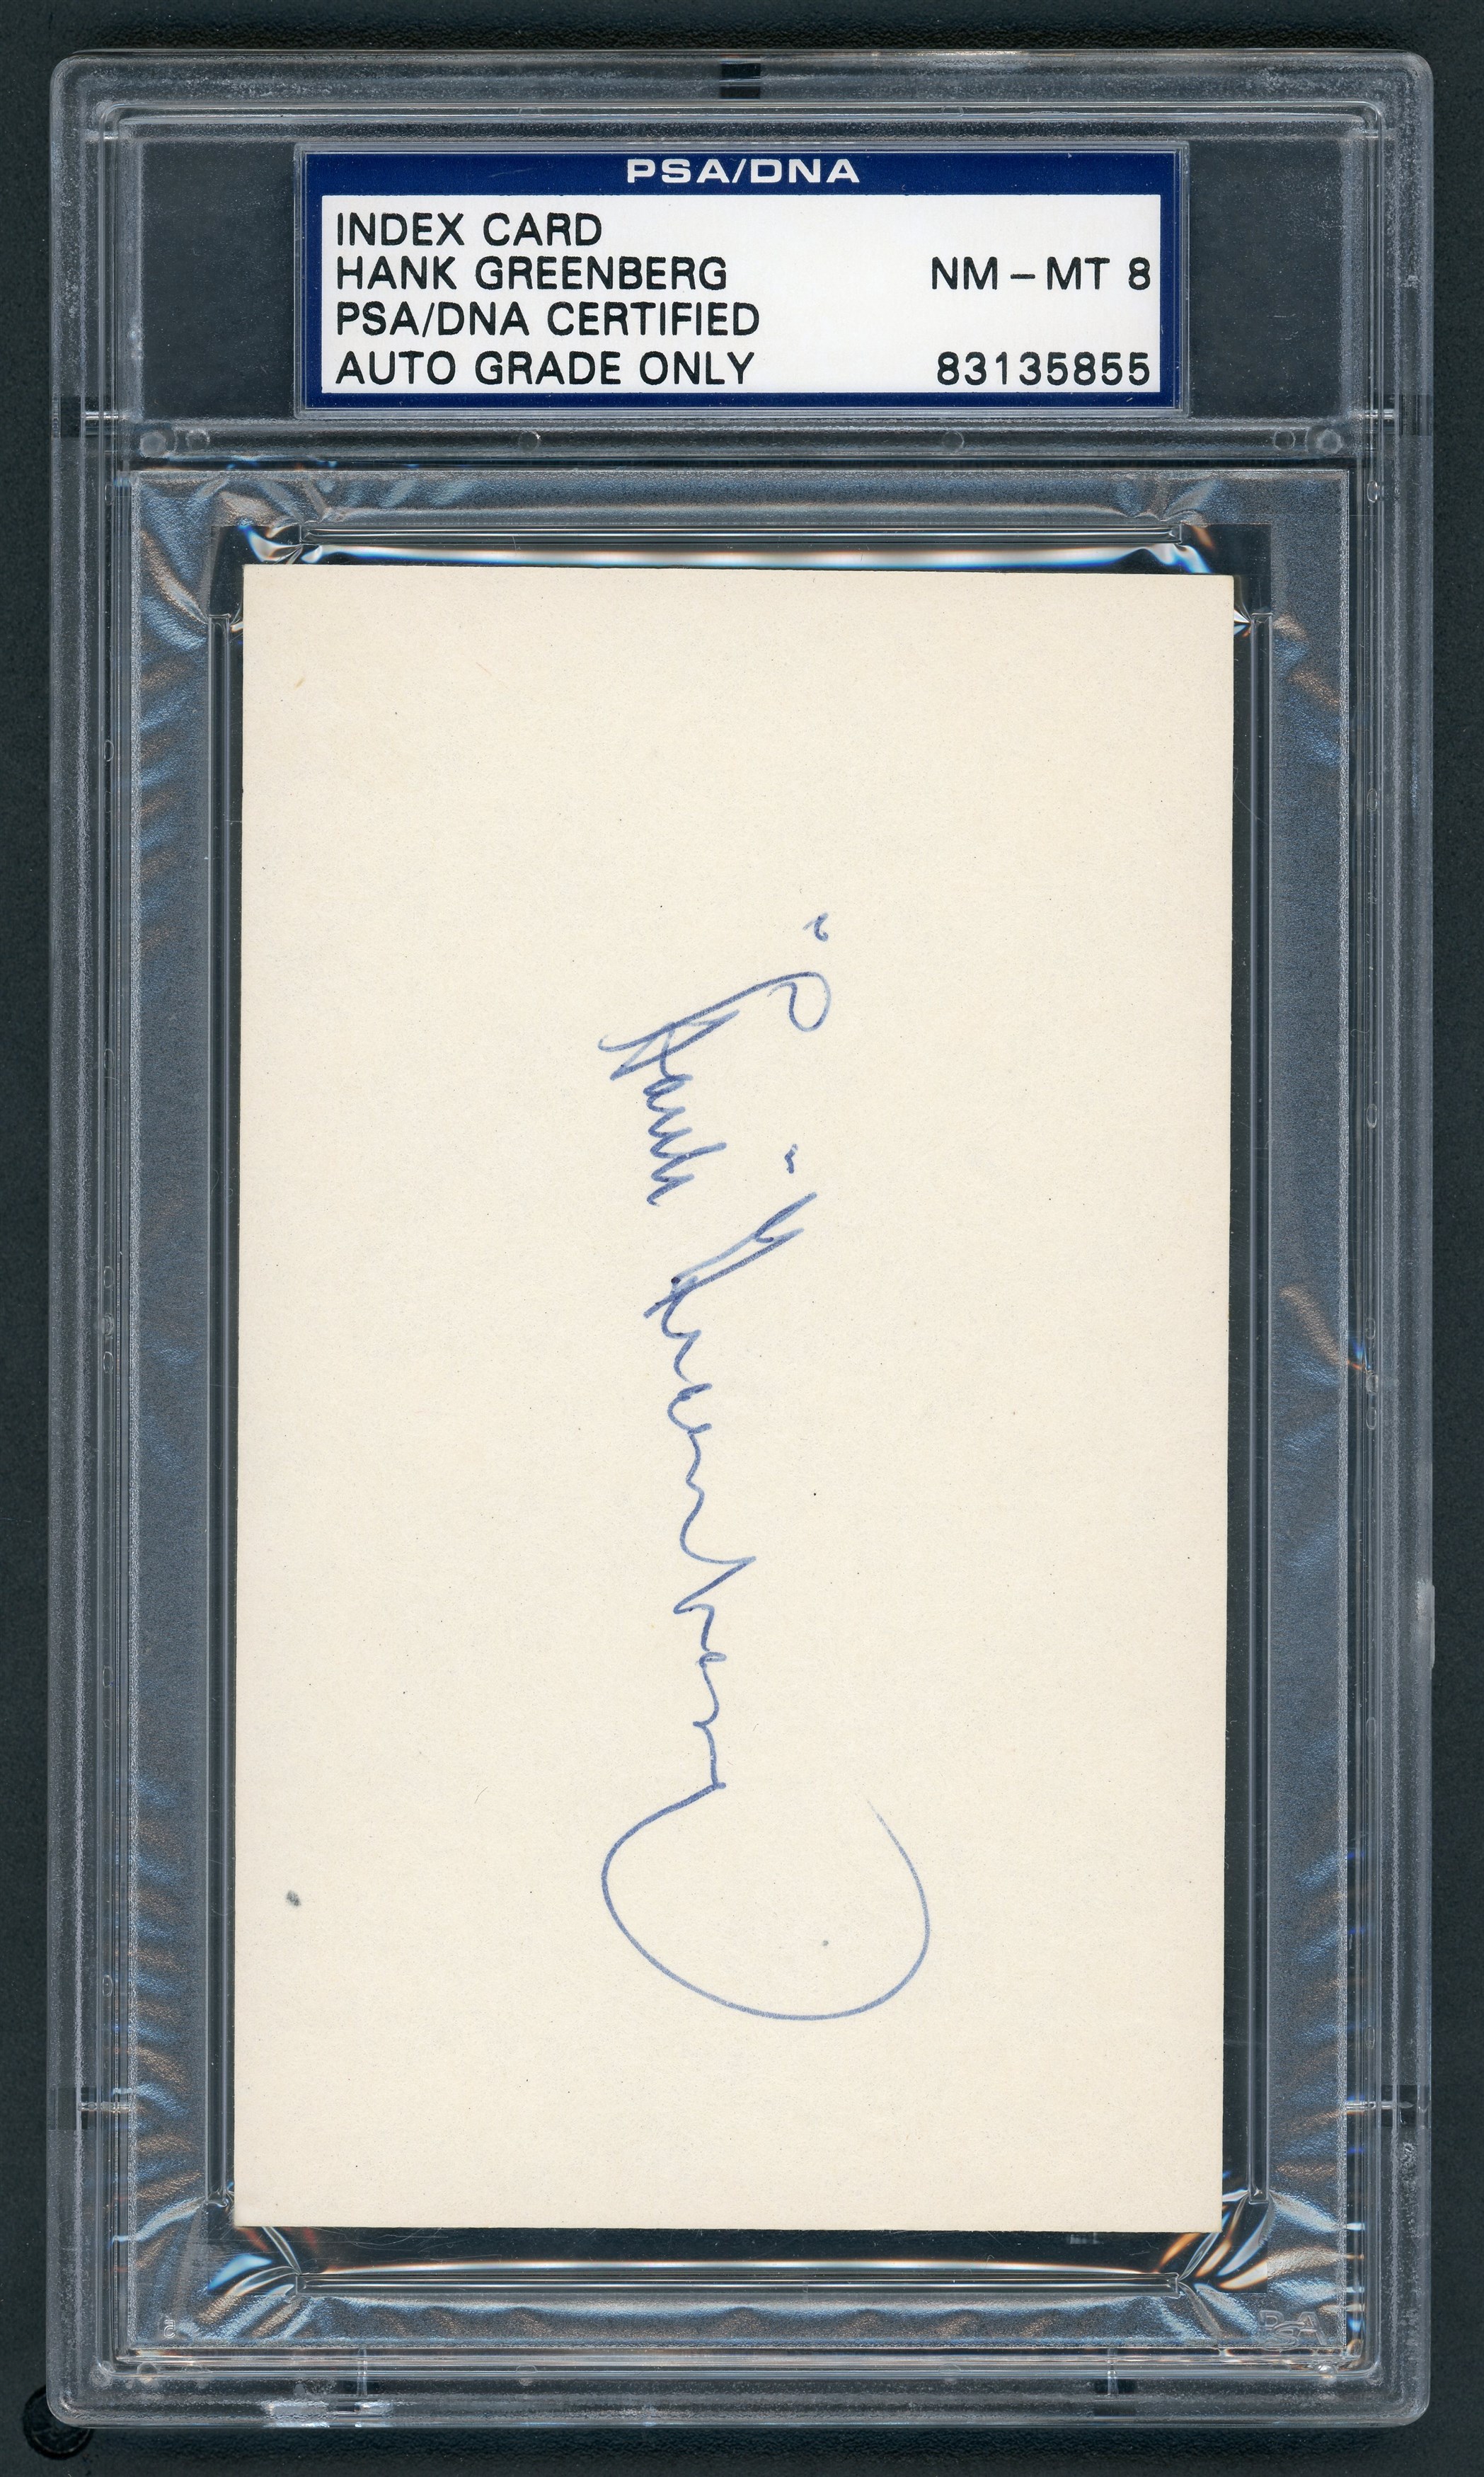 Ty Cobb and Detroit Tigers - Hank Greenberg Signed Index Card (PSA NM-MT 8)